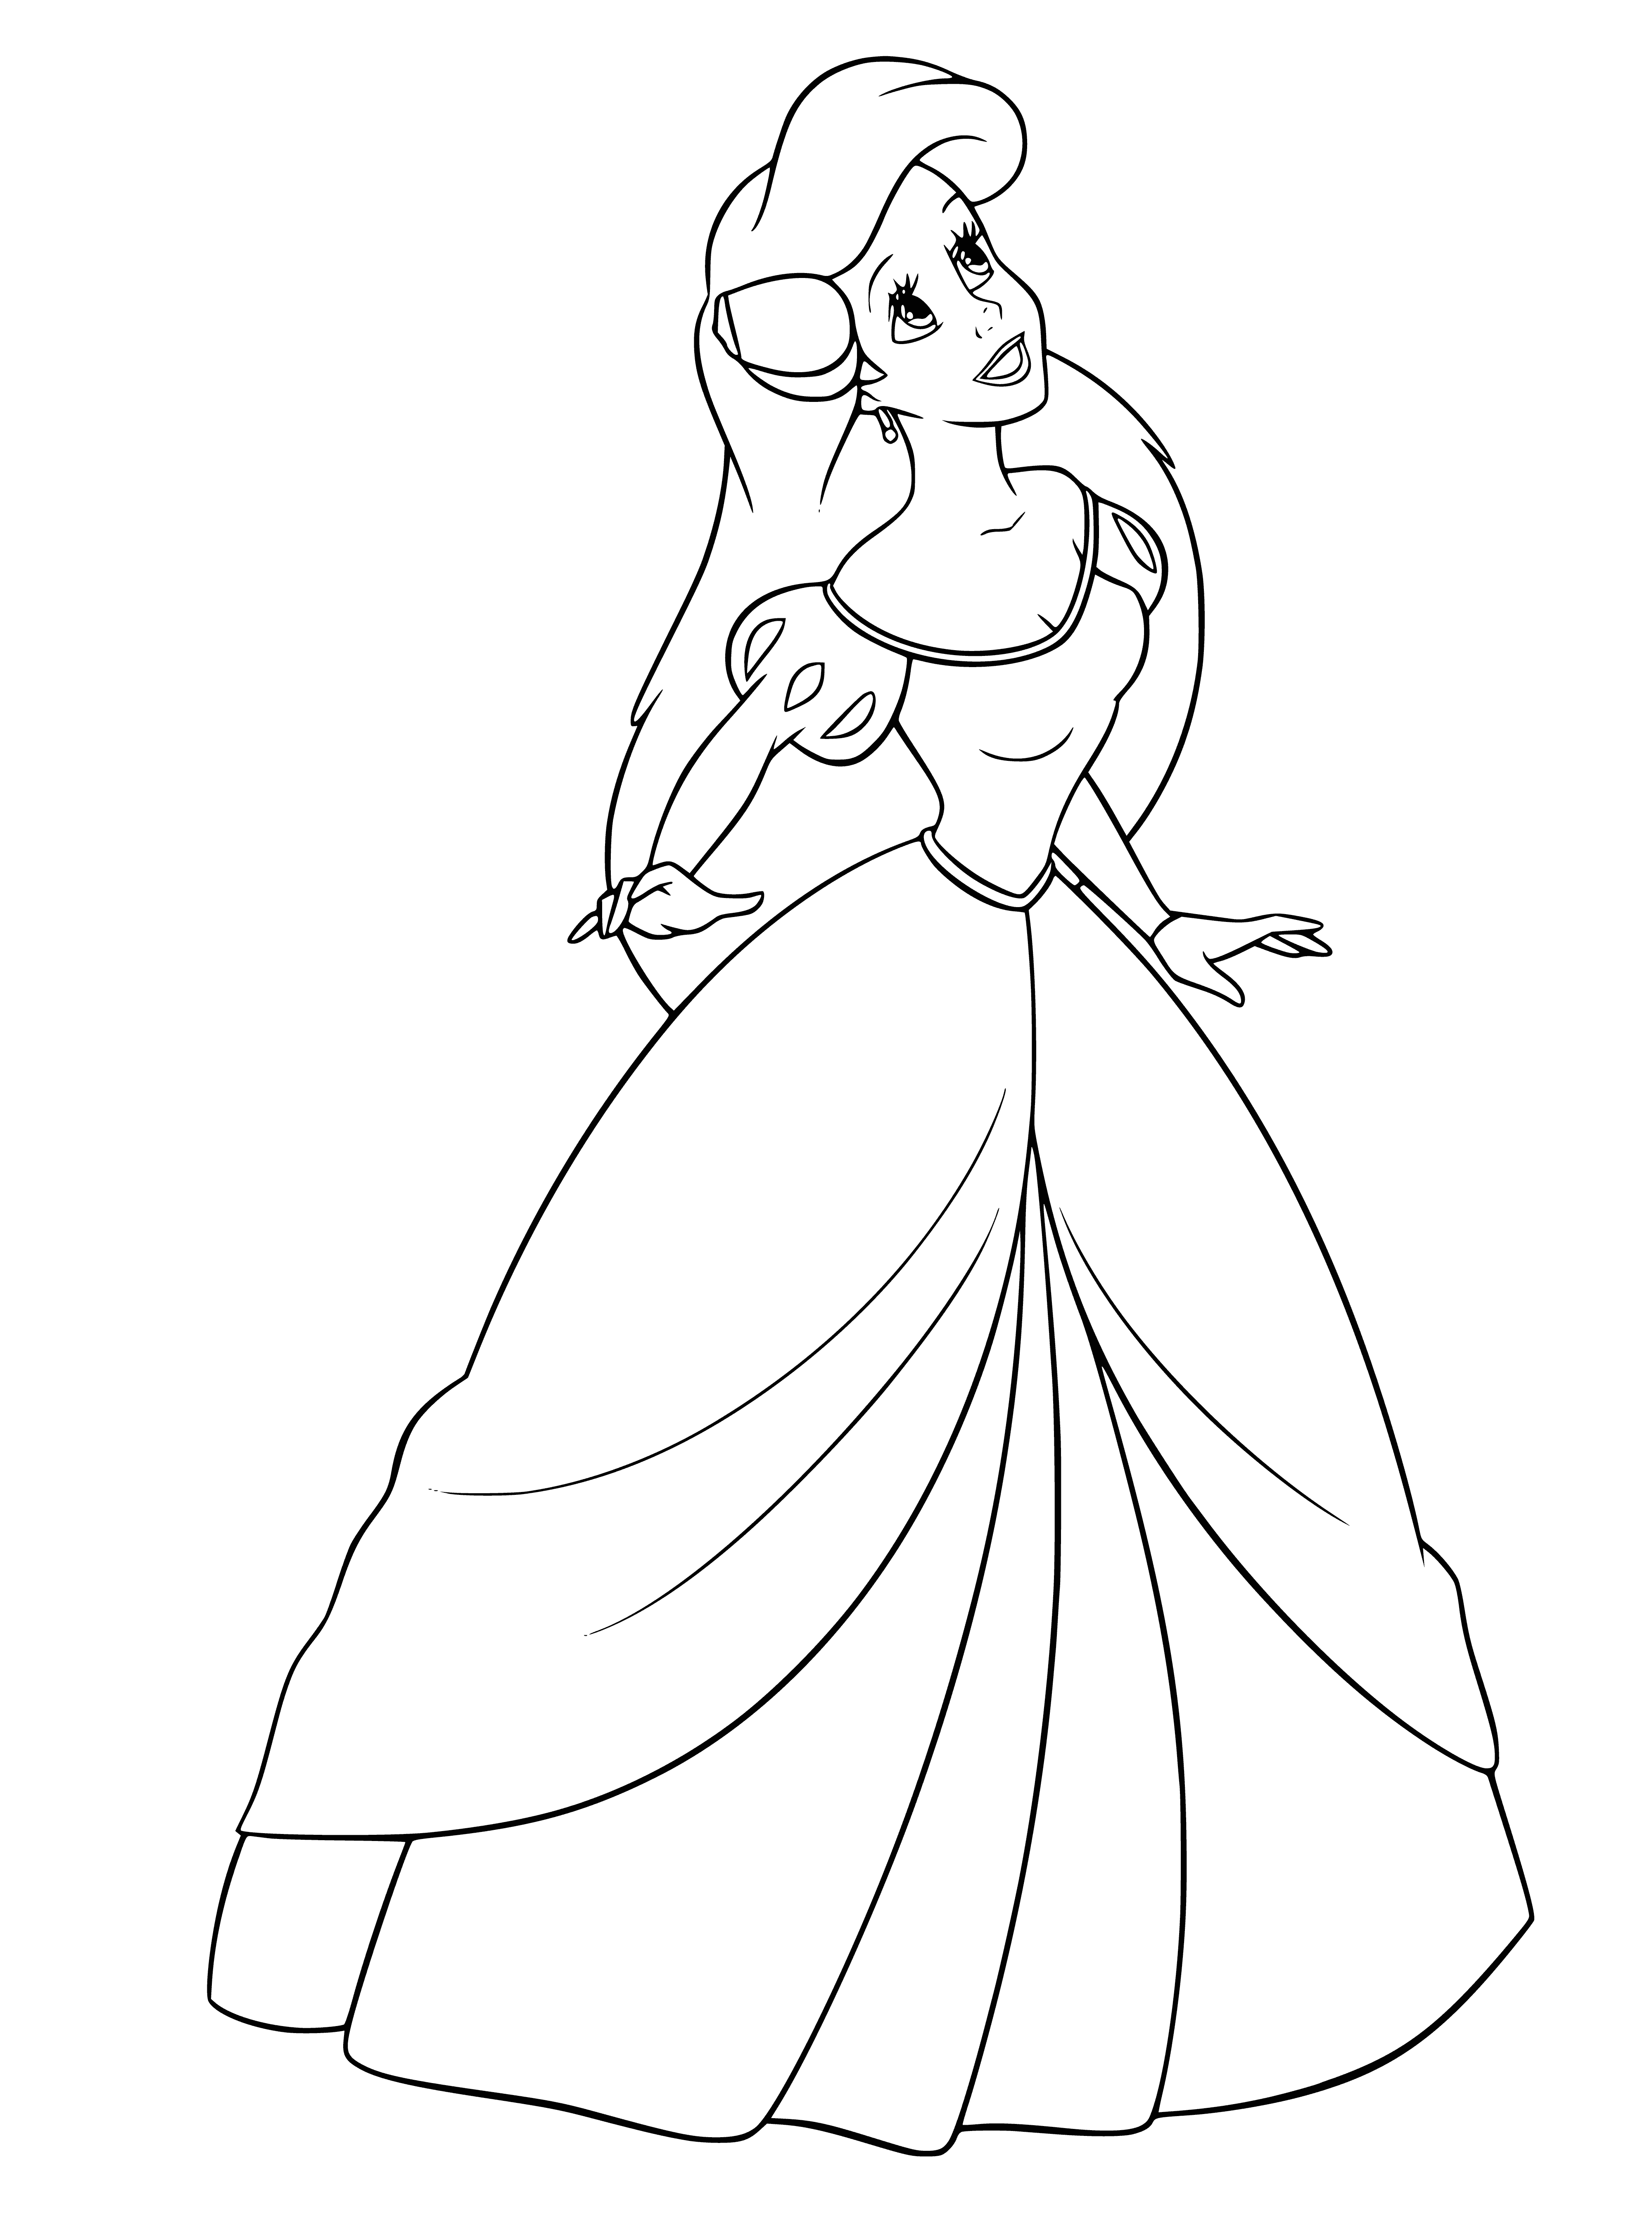 coloring page: Ariel, the Little Mermaid, lives under the sea with long red hair, blue and green tail, and a pink conch shell.